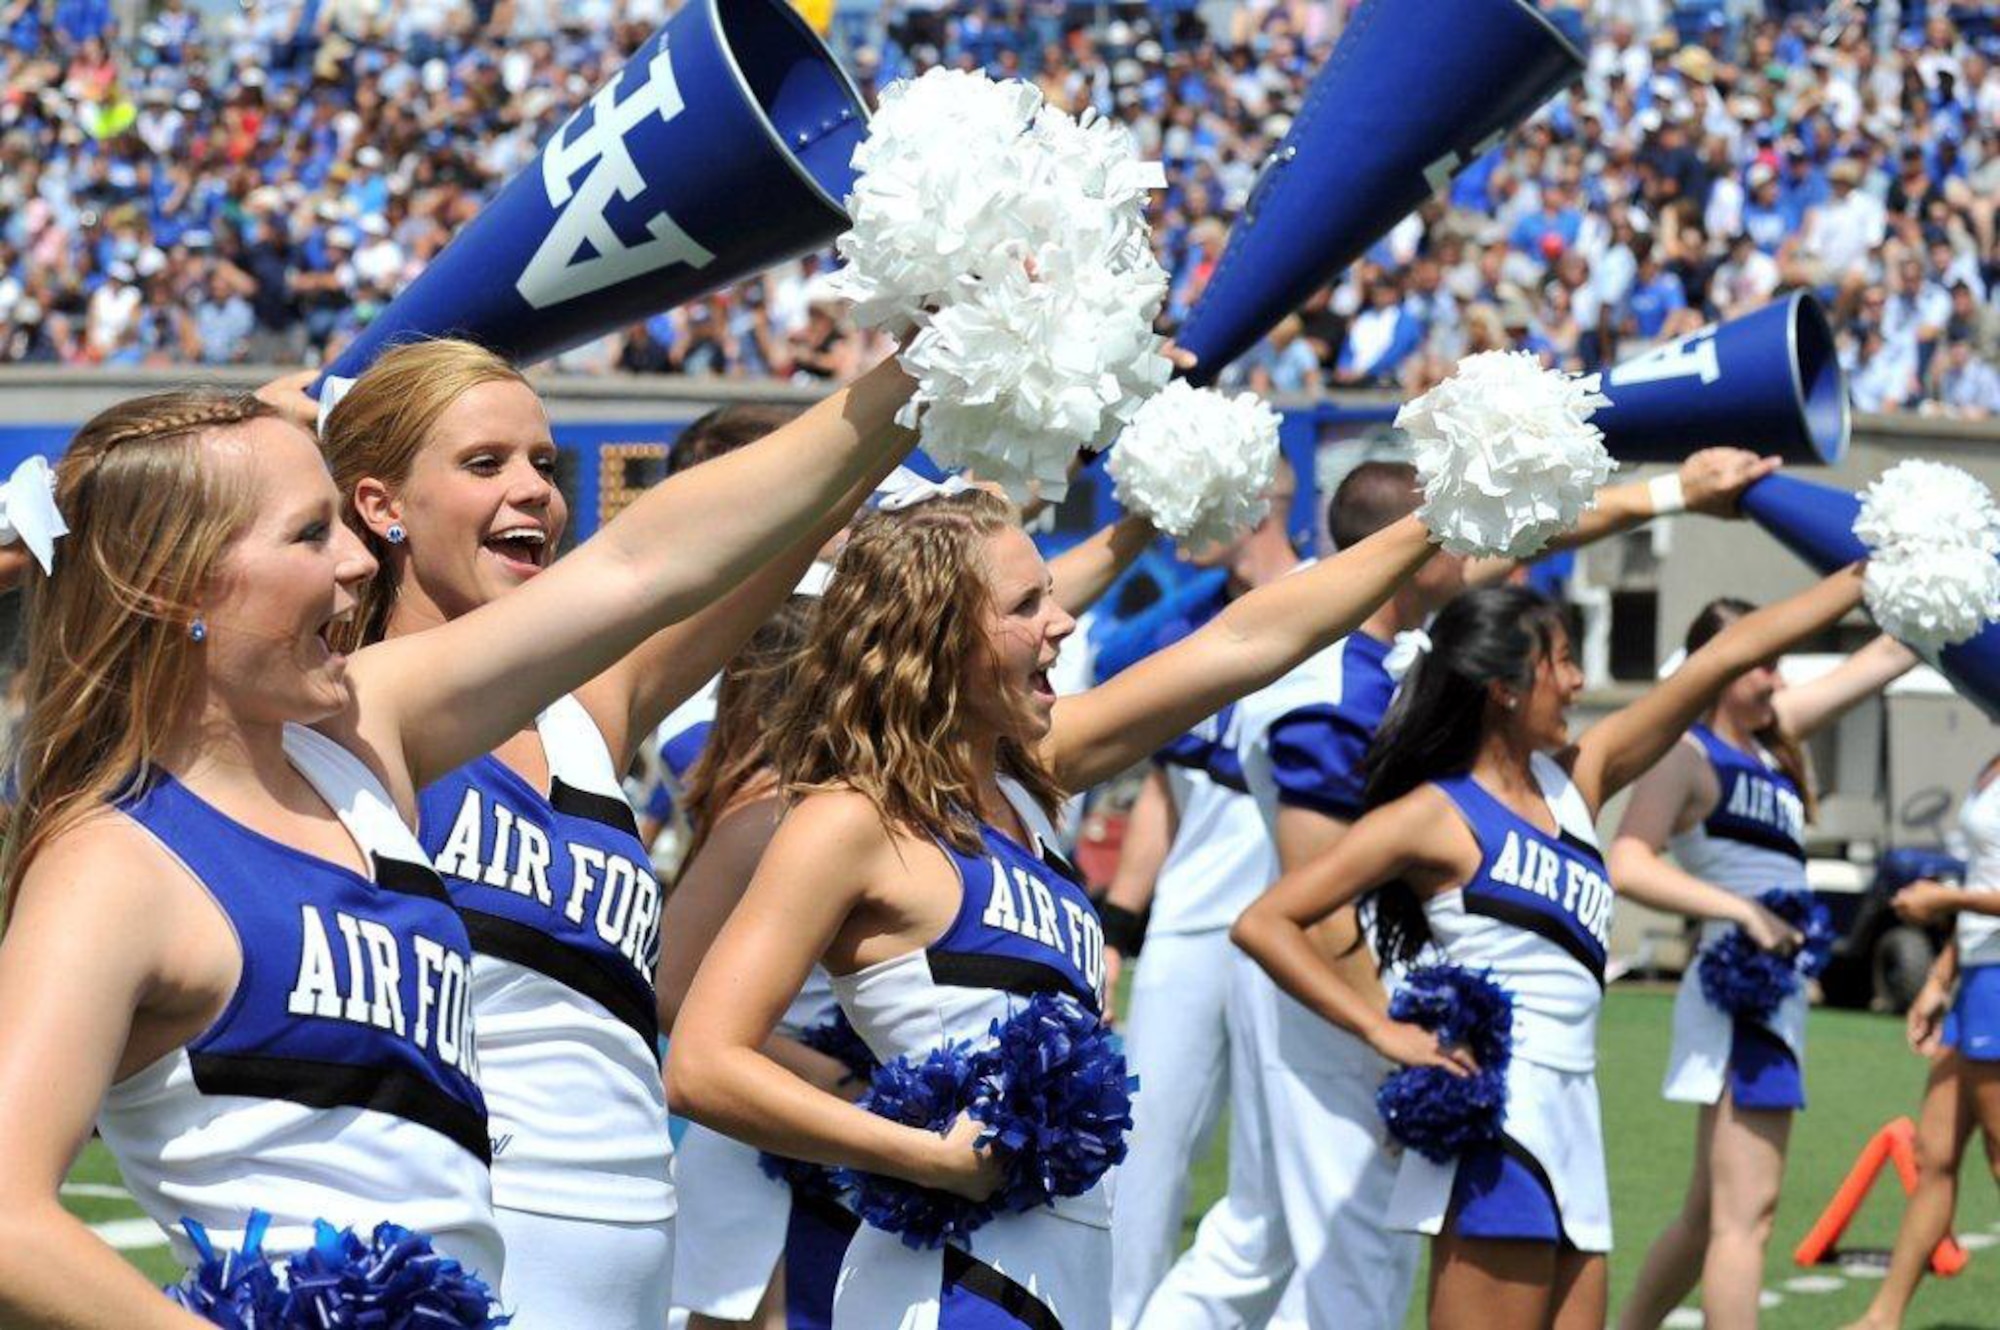 Cheerleaders showcase their Air Force spirit during the Academy’s win against Idaho State Sept. 1, 2012. Academy cheerleaders practice two hours every day to develop chants, stunts and routines for every football and basketball game. (U.S. Air Force photo/Liz Copan)